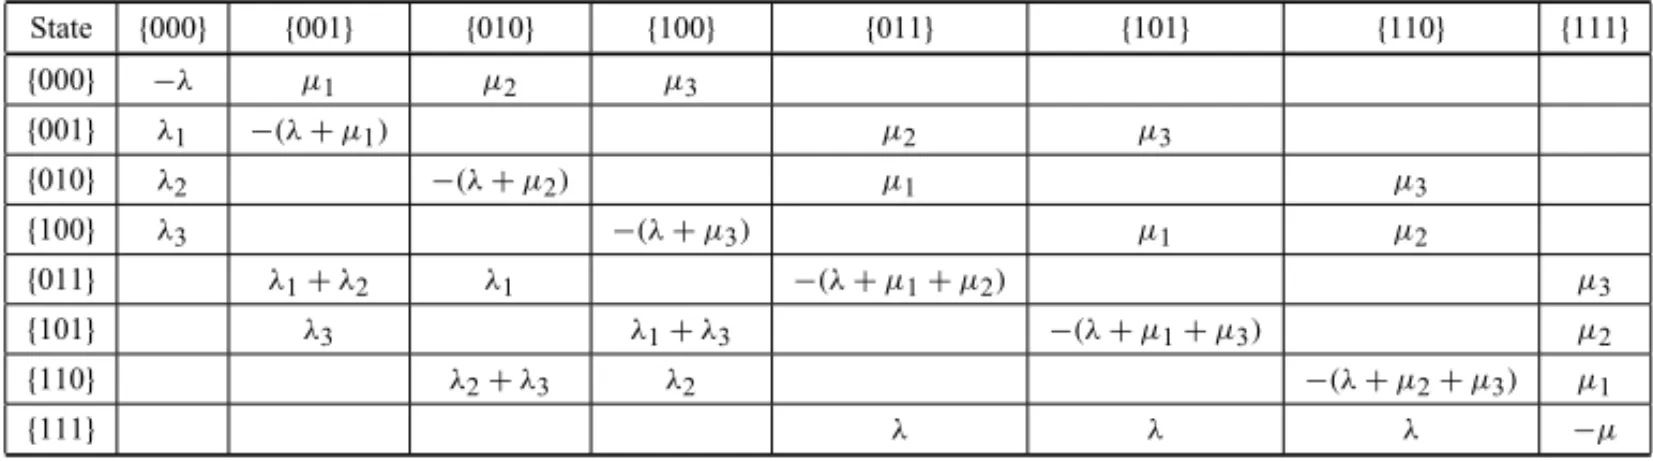 Table 3 – Coefficients matrix of the system of equations for the basic model with zero waiting line.